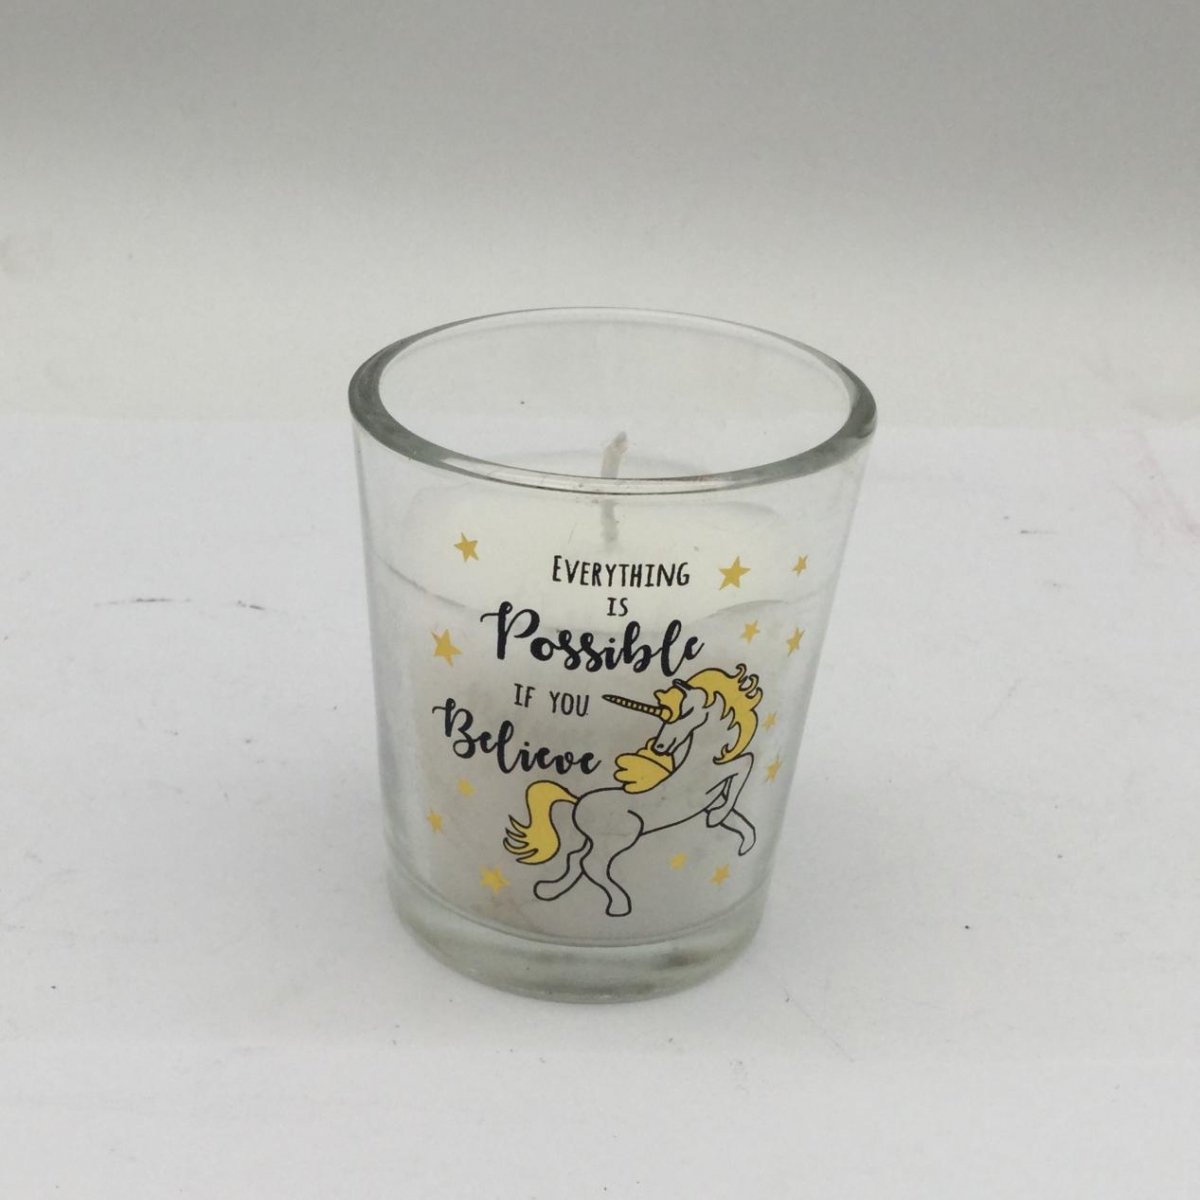 Vegan Candles：Custom Decal , Display Box , Scented Candles ,China Factory , Wholesale Price-HOWCANDLE-Candles,Scented Candles,Aromatherapy Candles,Soy Candles,Vegan Candles,Jar Candles,Pillar Candles,Candle Gift Sets,Essential Oils,Reed Diffuser,Candle Holder,